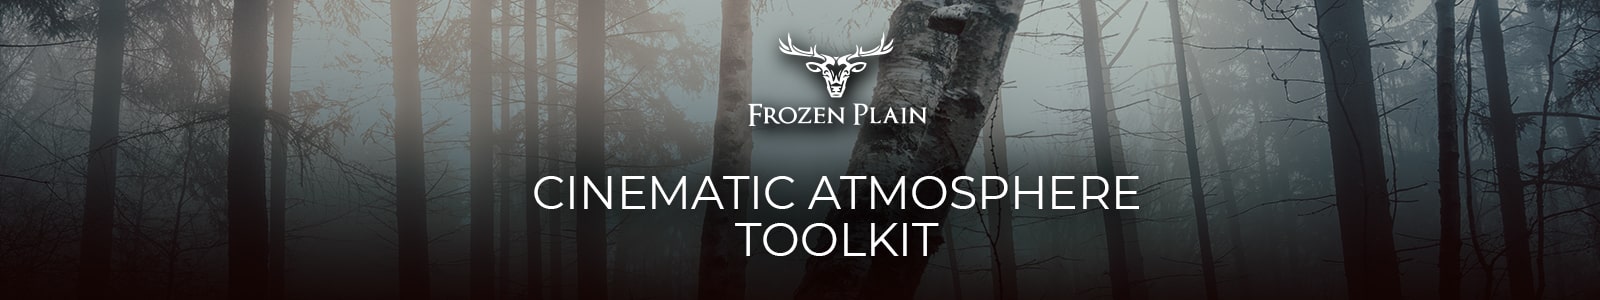 Cinematic Atmosphere Toolkit by frozen plain